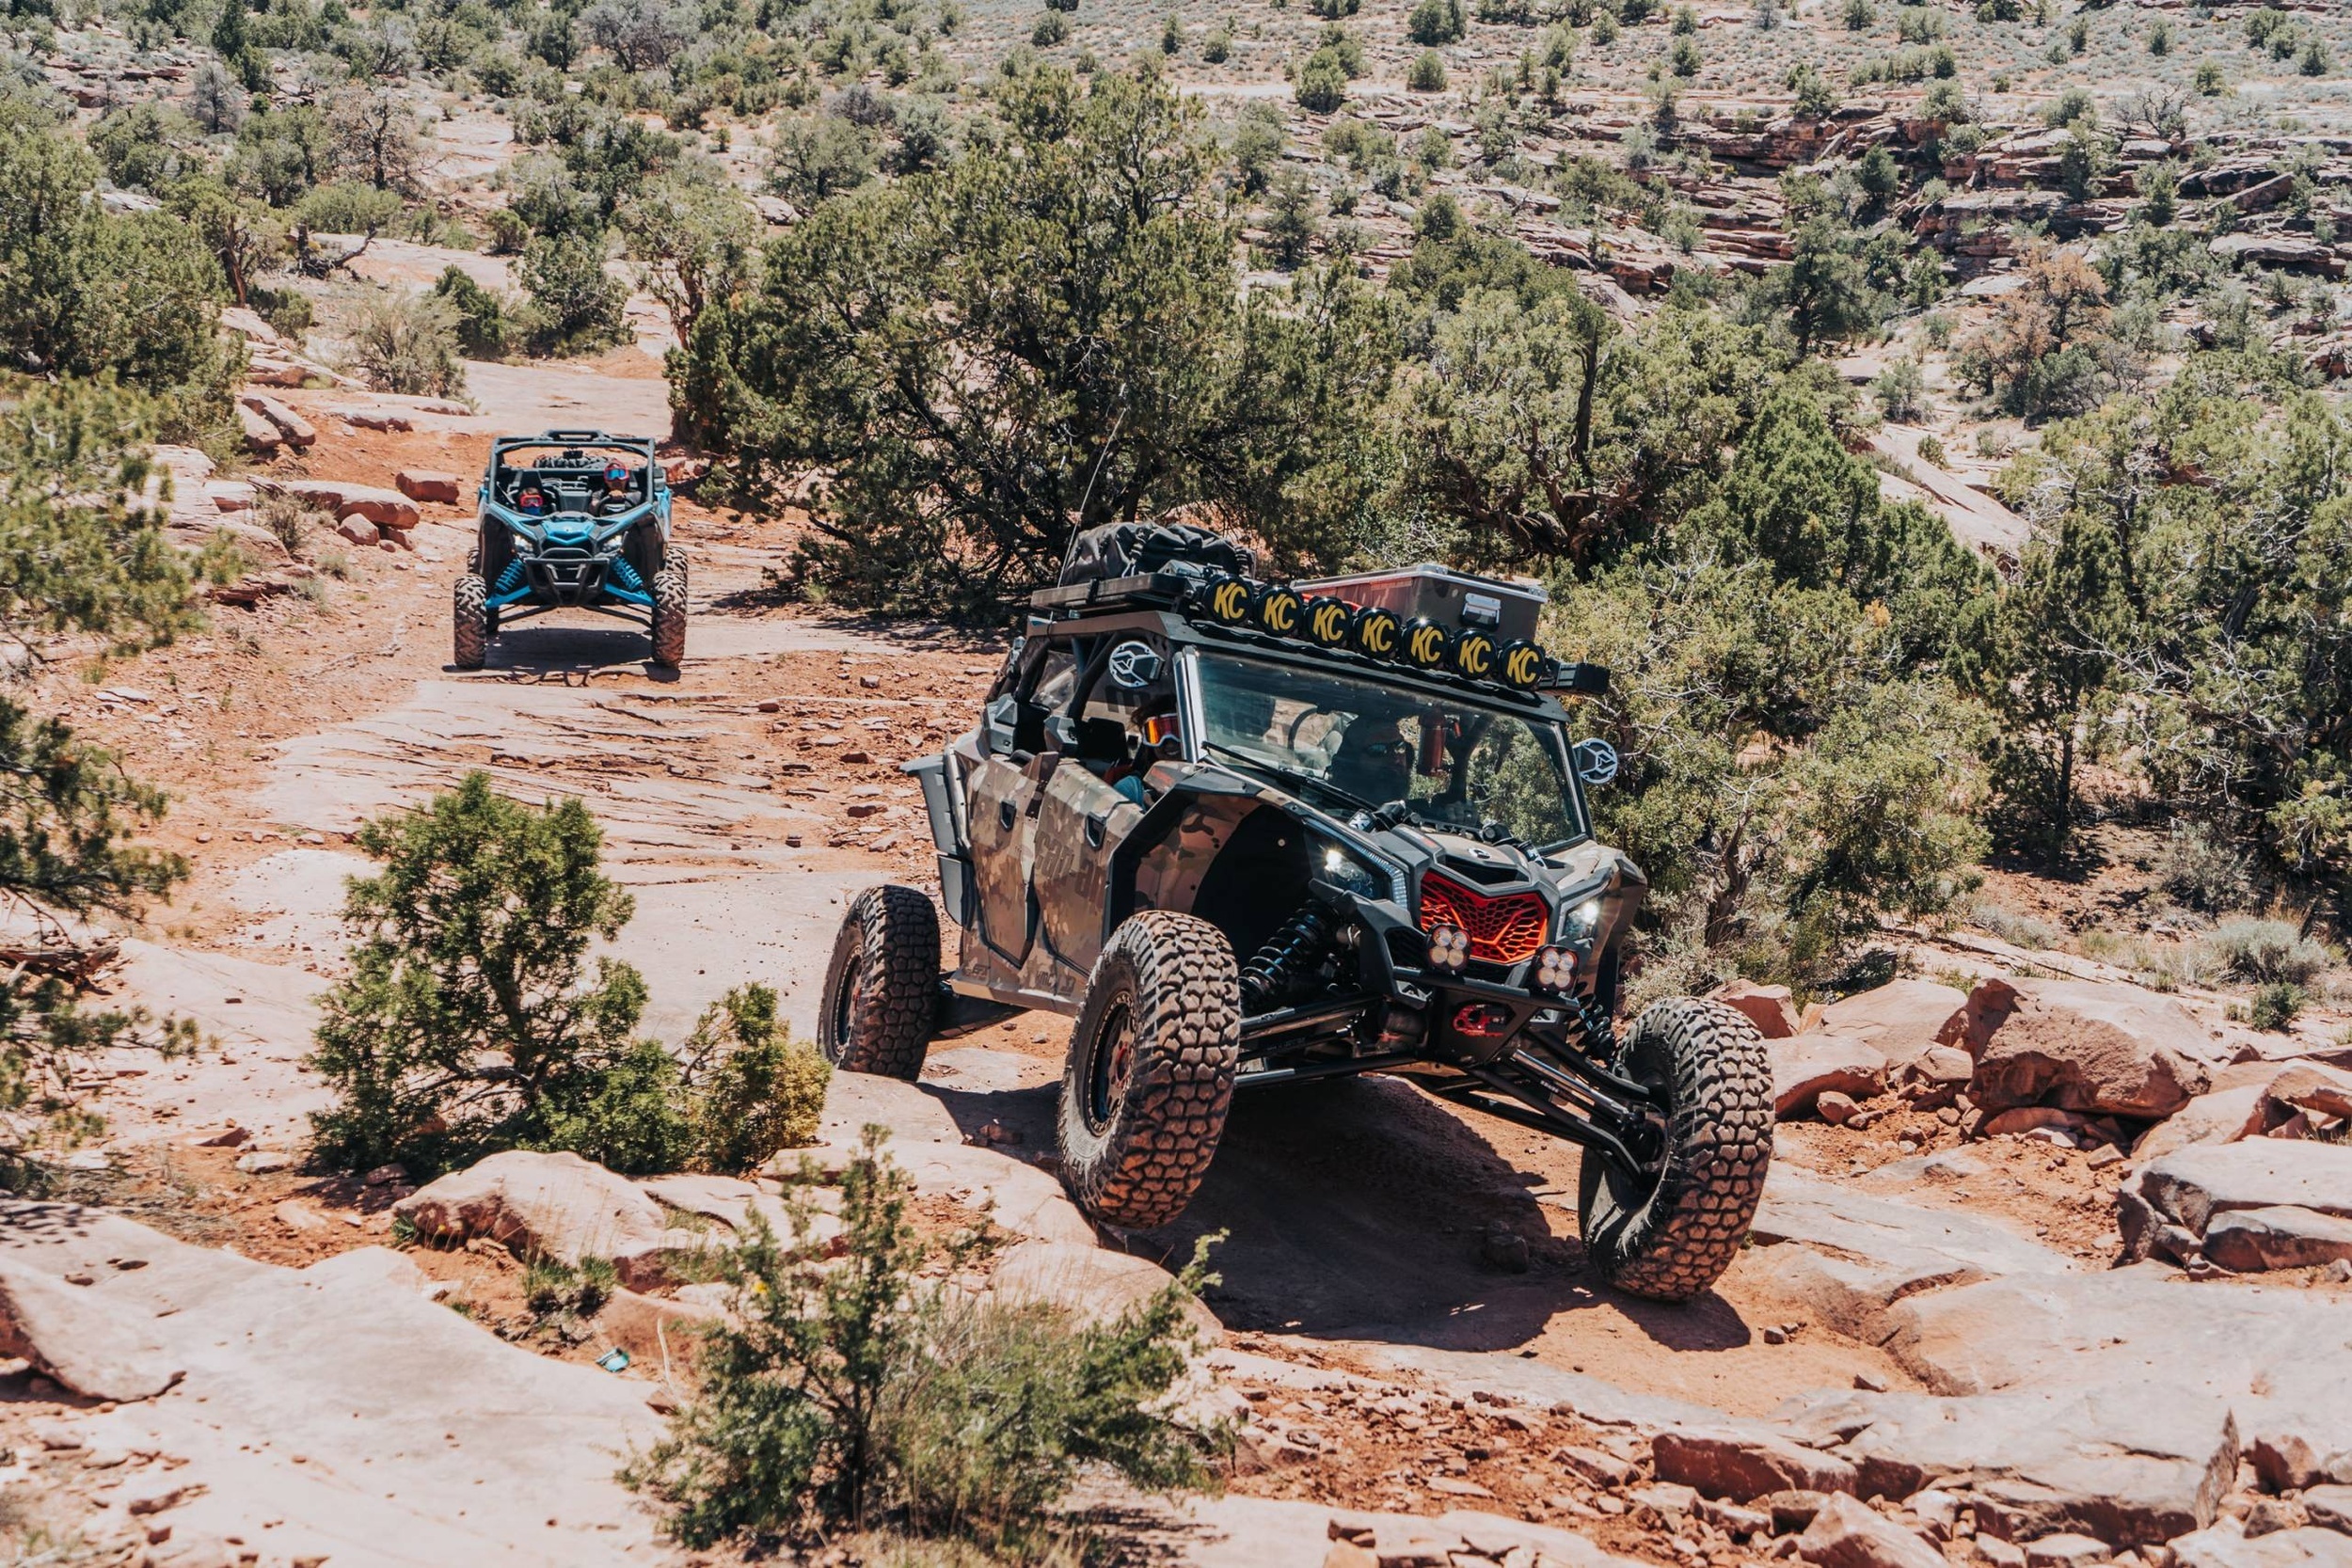 <p>Currently, UTVs in Moab are restricted from entering National Parks. Still, that doesn't mean you can't explore trails and discover views on these mini vehicles. Just remember to do your research ahead of time. Some trails are not meant for UTVs.</p><p><a href='https://www.msn.com/en-us/community/channel/vid-cj9pqbr0vn9in2b6ddcd8sfgpfq6x6utp44fssrv6mc2gtybw0us'>Follow us on MSN to see more of our exclusive lifestyle content.</a></p>